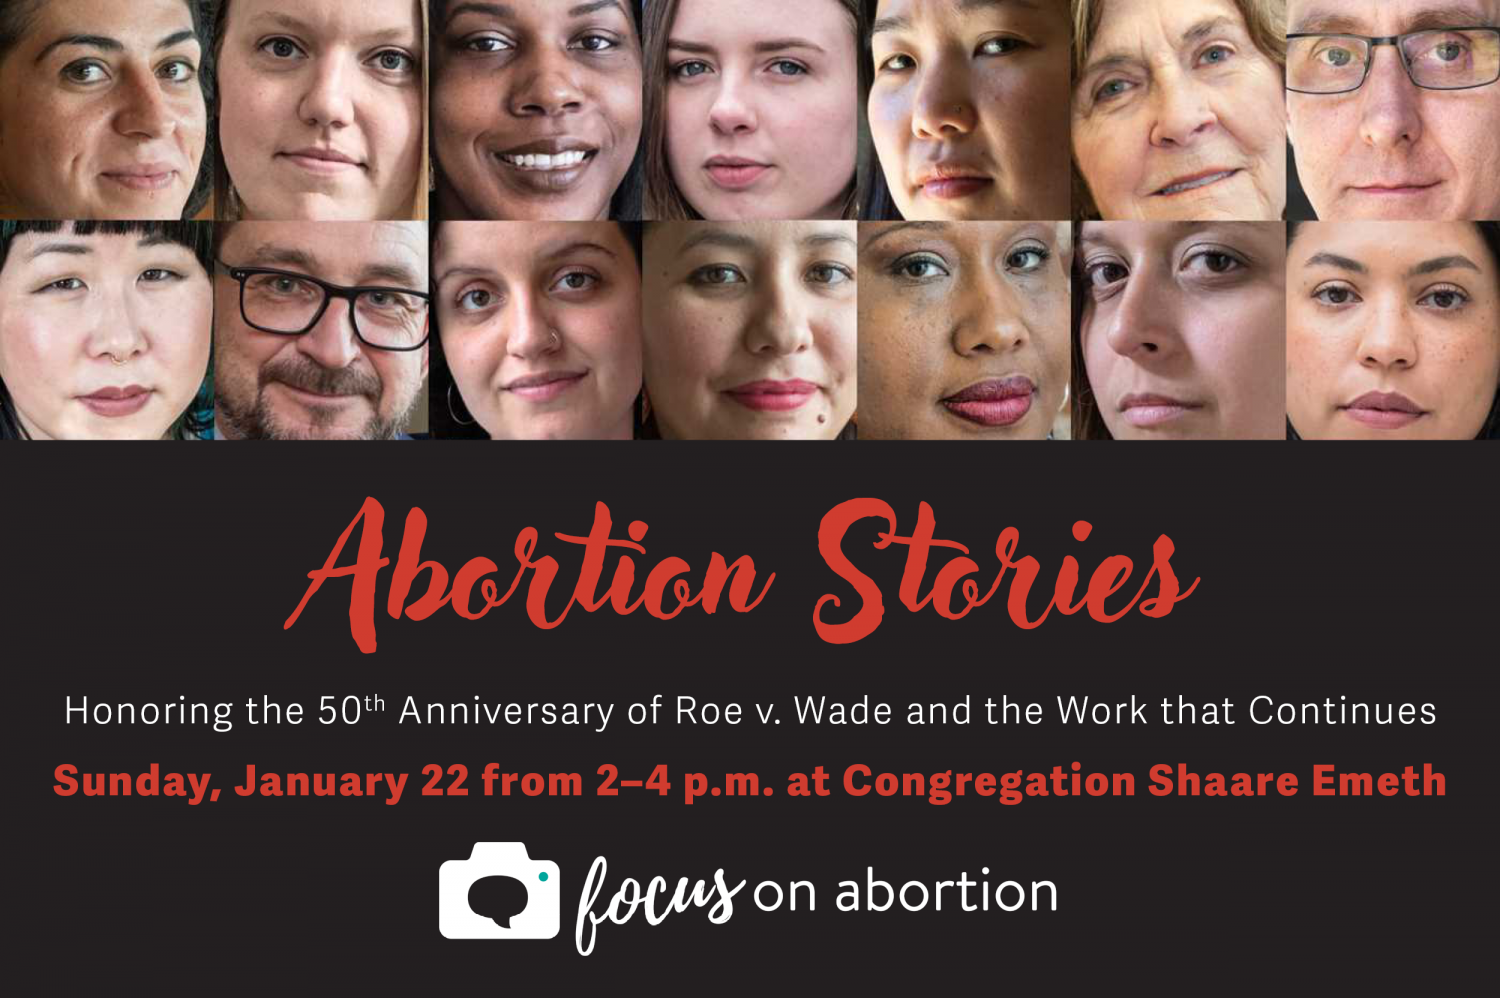 Abortion Stories graphic featuring portraits from photo exhibit